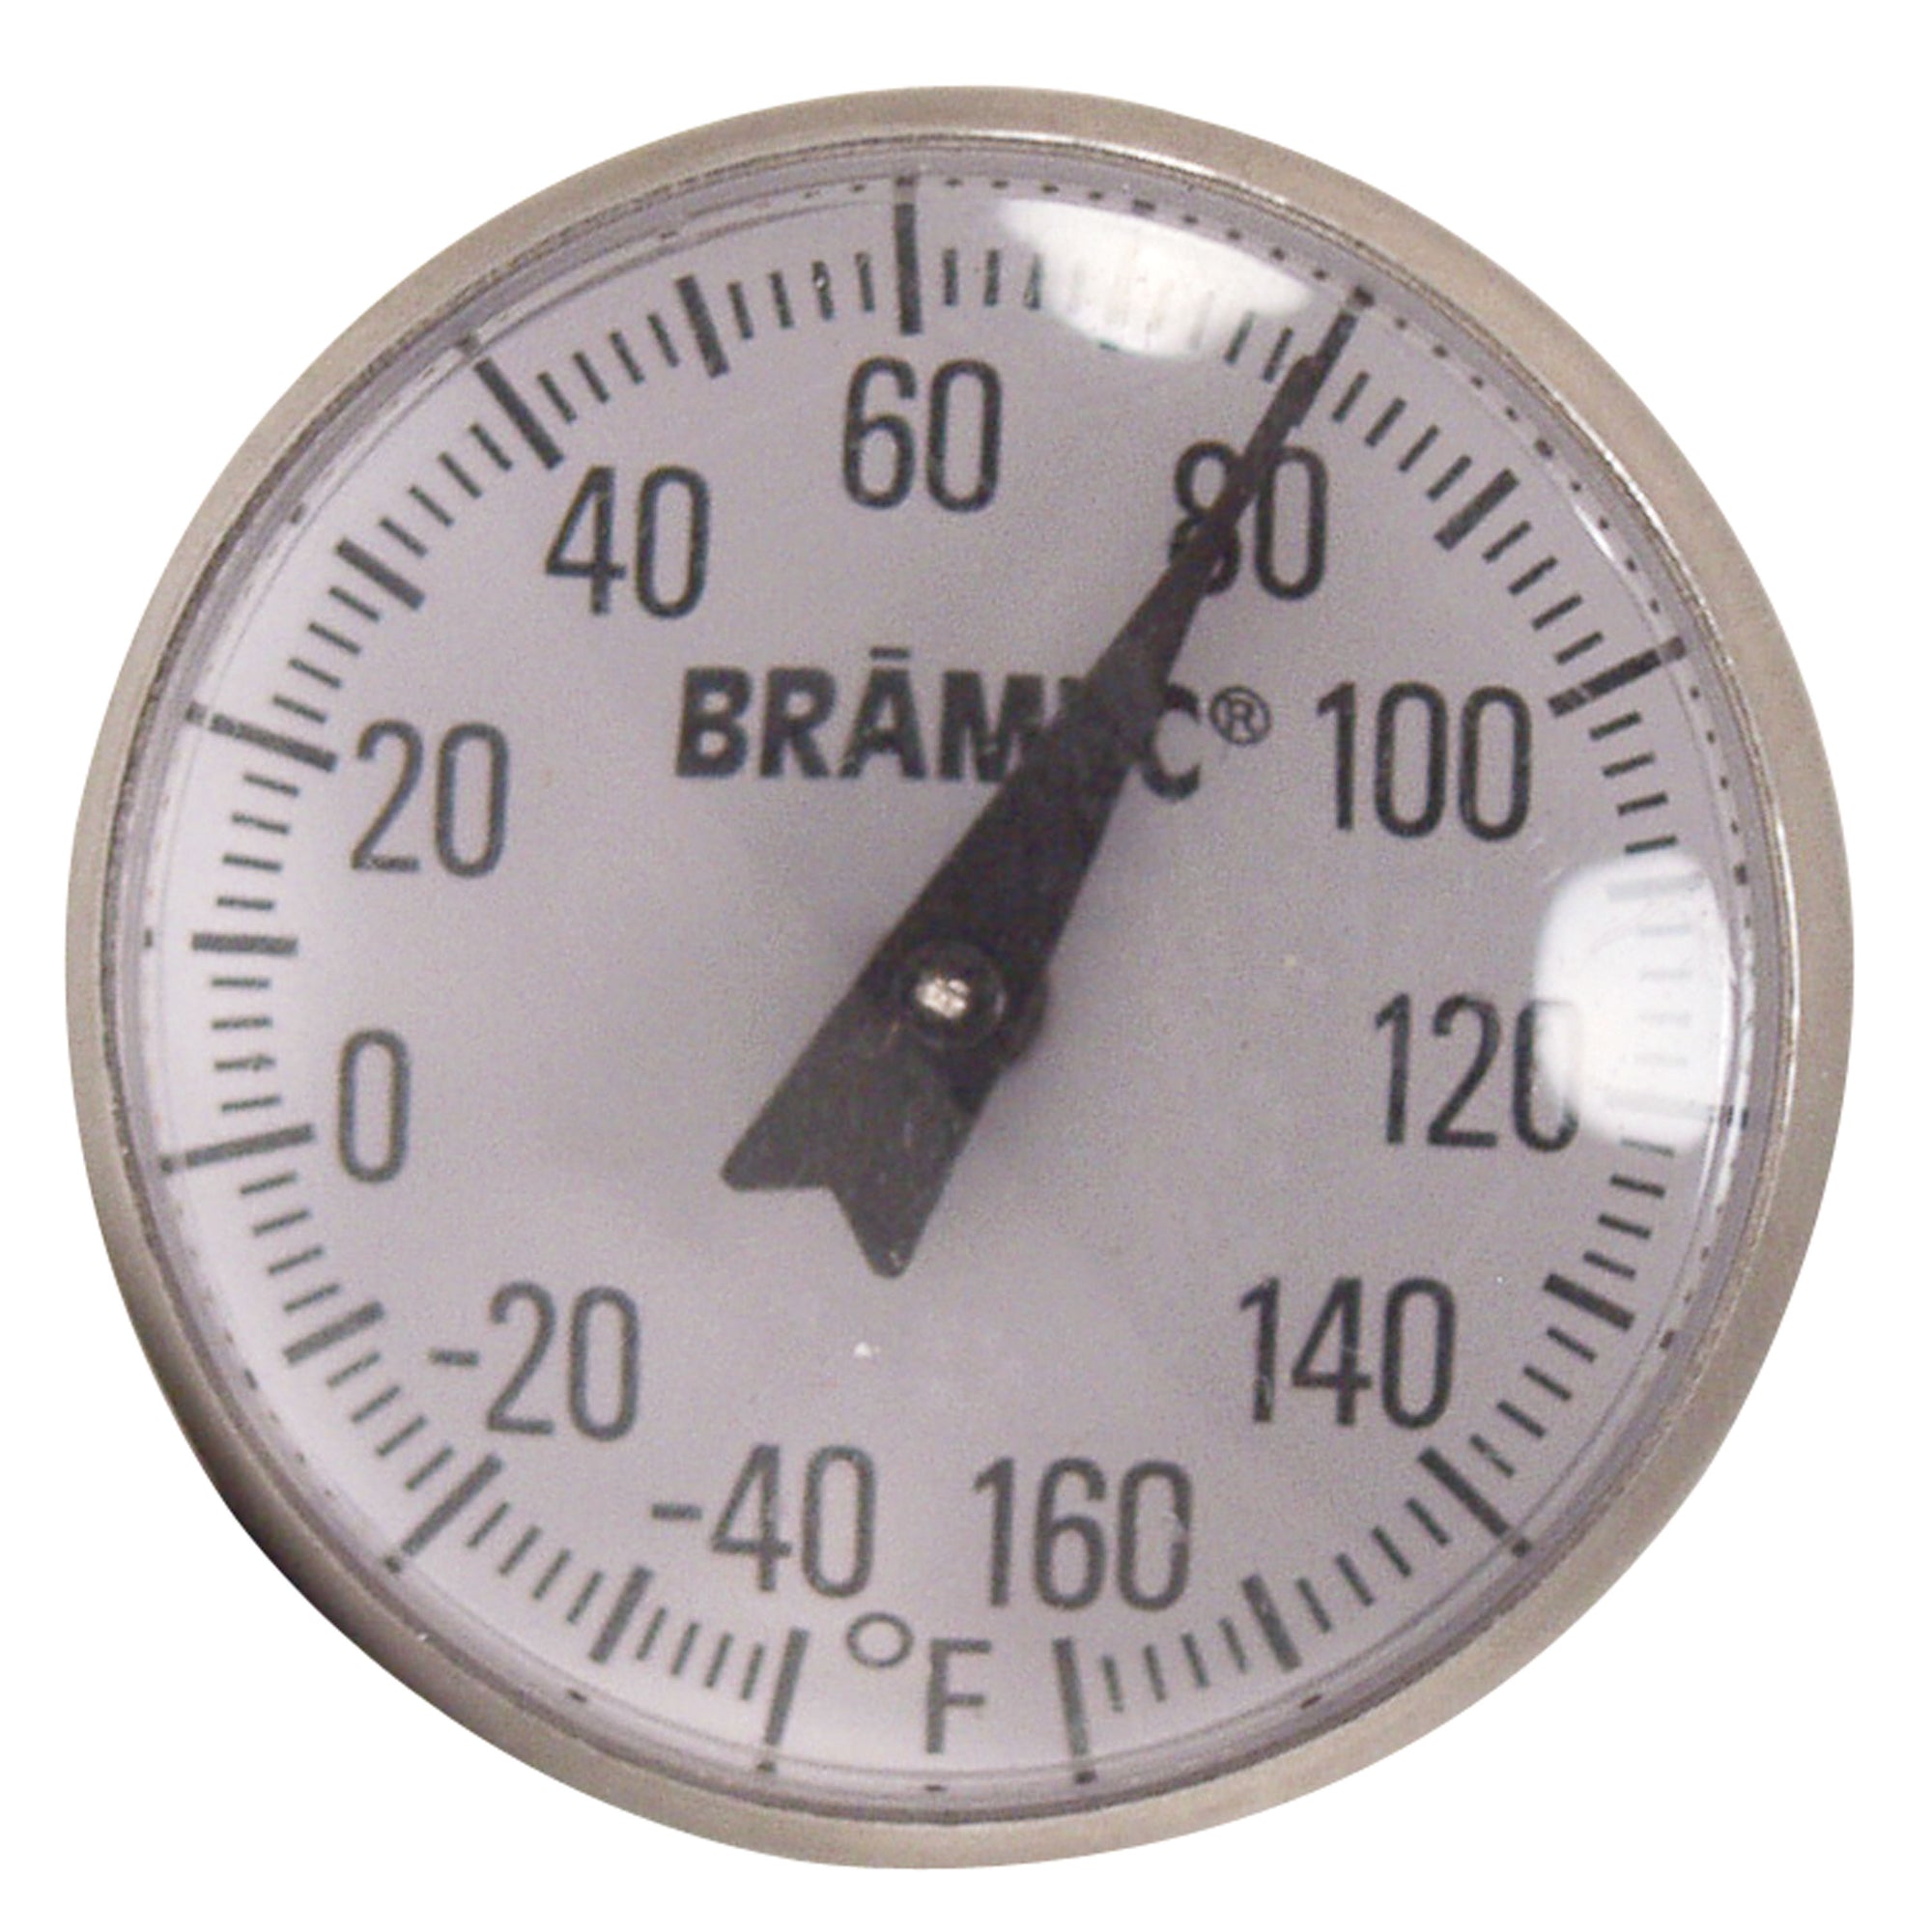 Bramec 8966 Dial Thermometer - -40° to +160° F, 2° Increments, 1" Dial